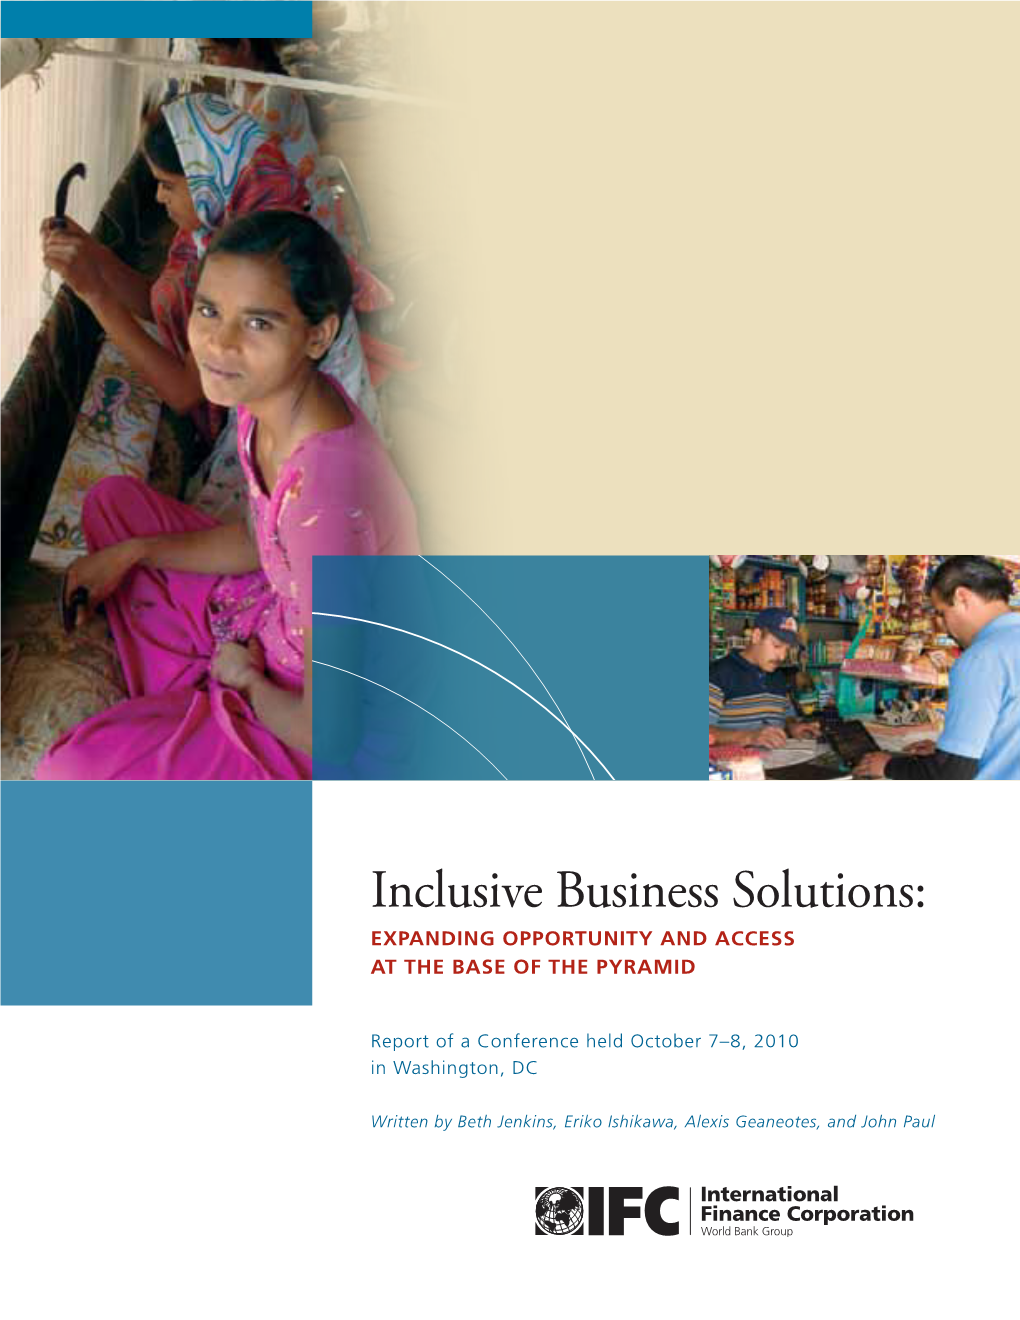 Inclusive Business Solutions: EXPANDING OPPORTUNITY and ACCESS at the BASE of the PYRAMID